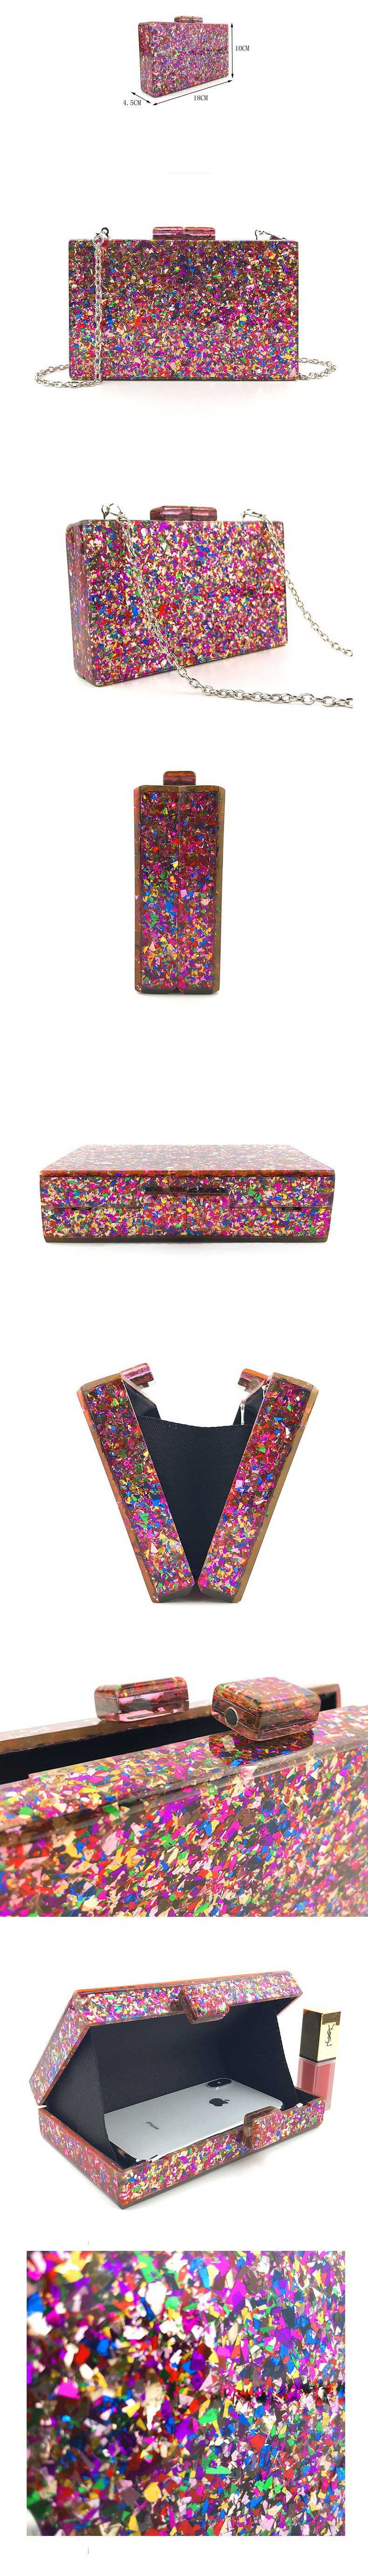 New Acrylic Colorful Glitter Sequins Evening Clutch Bag